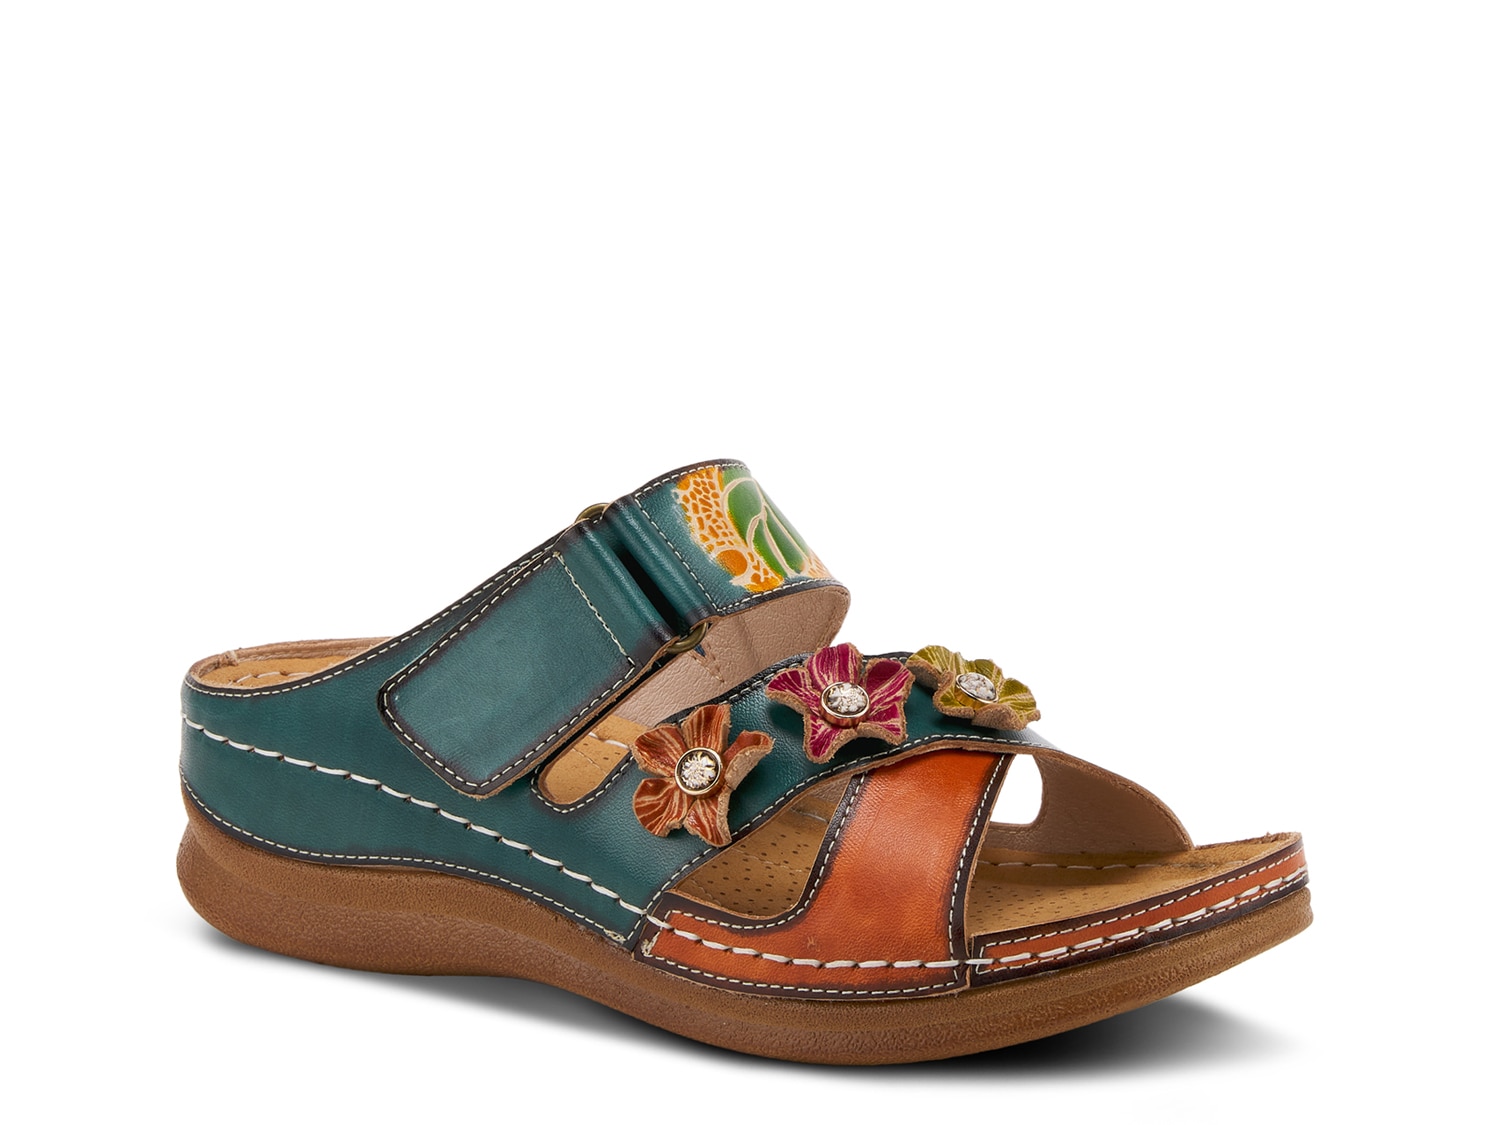 L'Artiste by Spring Step Erinee Wedge Sandal - Free Shipping | DSW